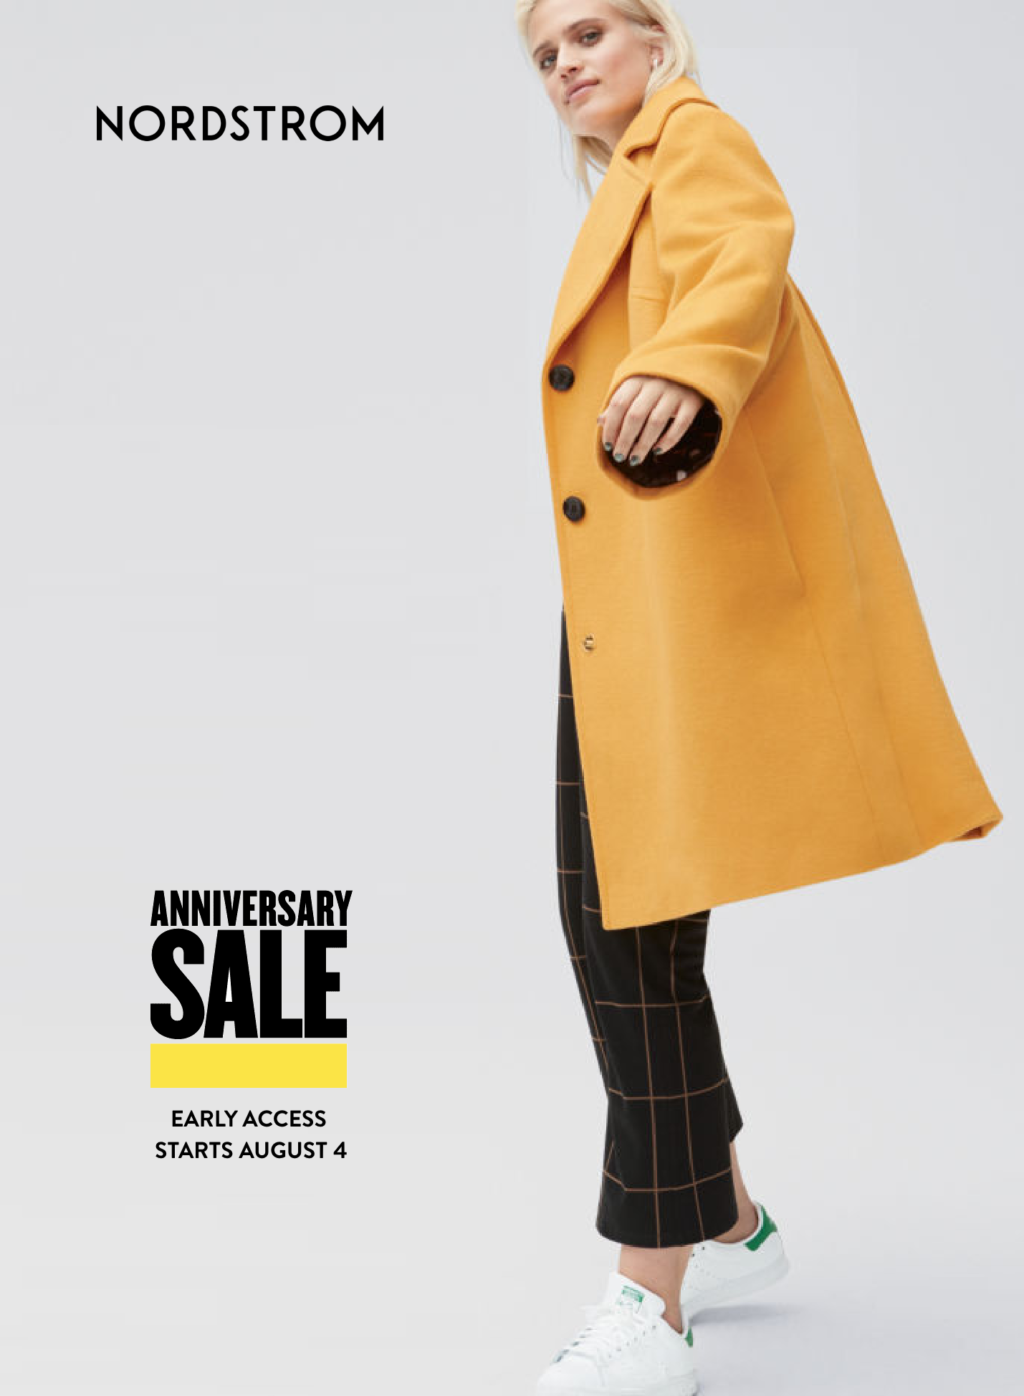 Nordstrom Anniversary Sale 2020: When it starts and what the best deals are